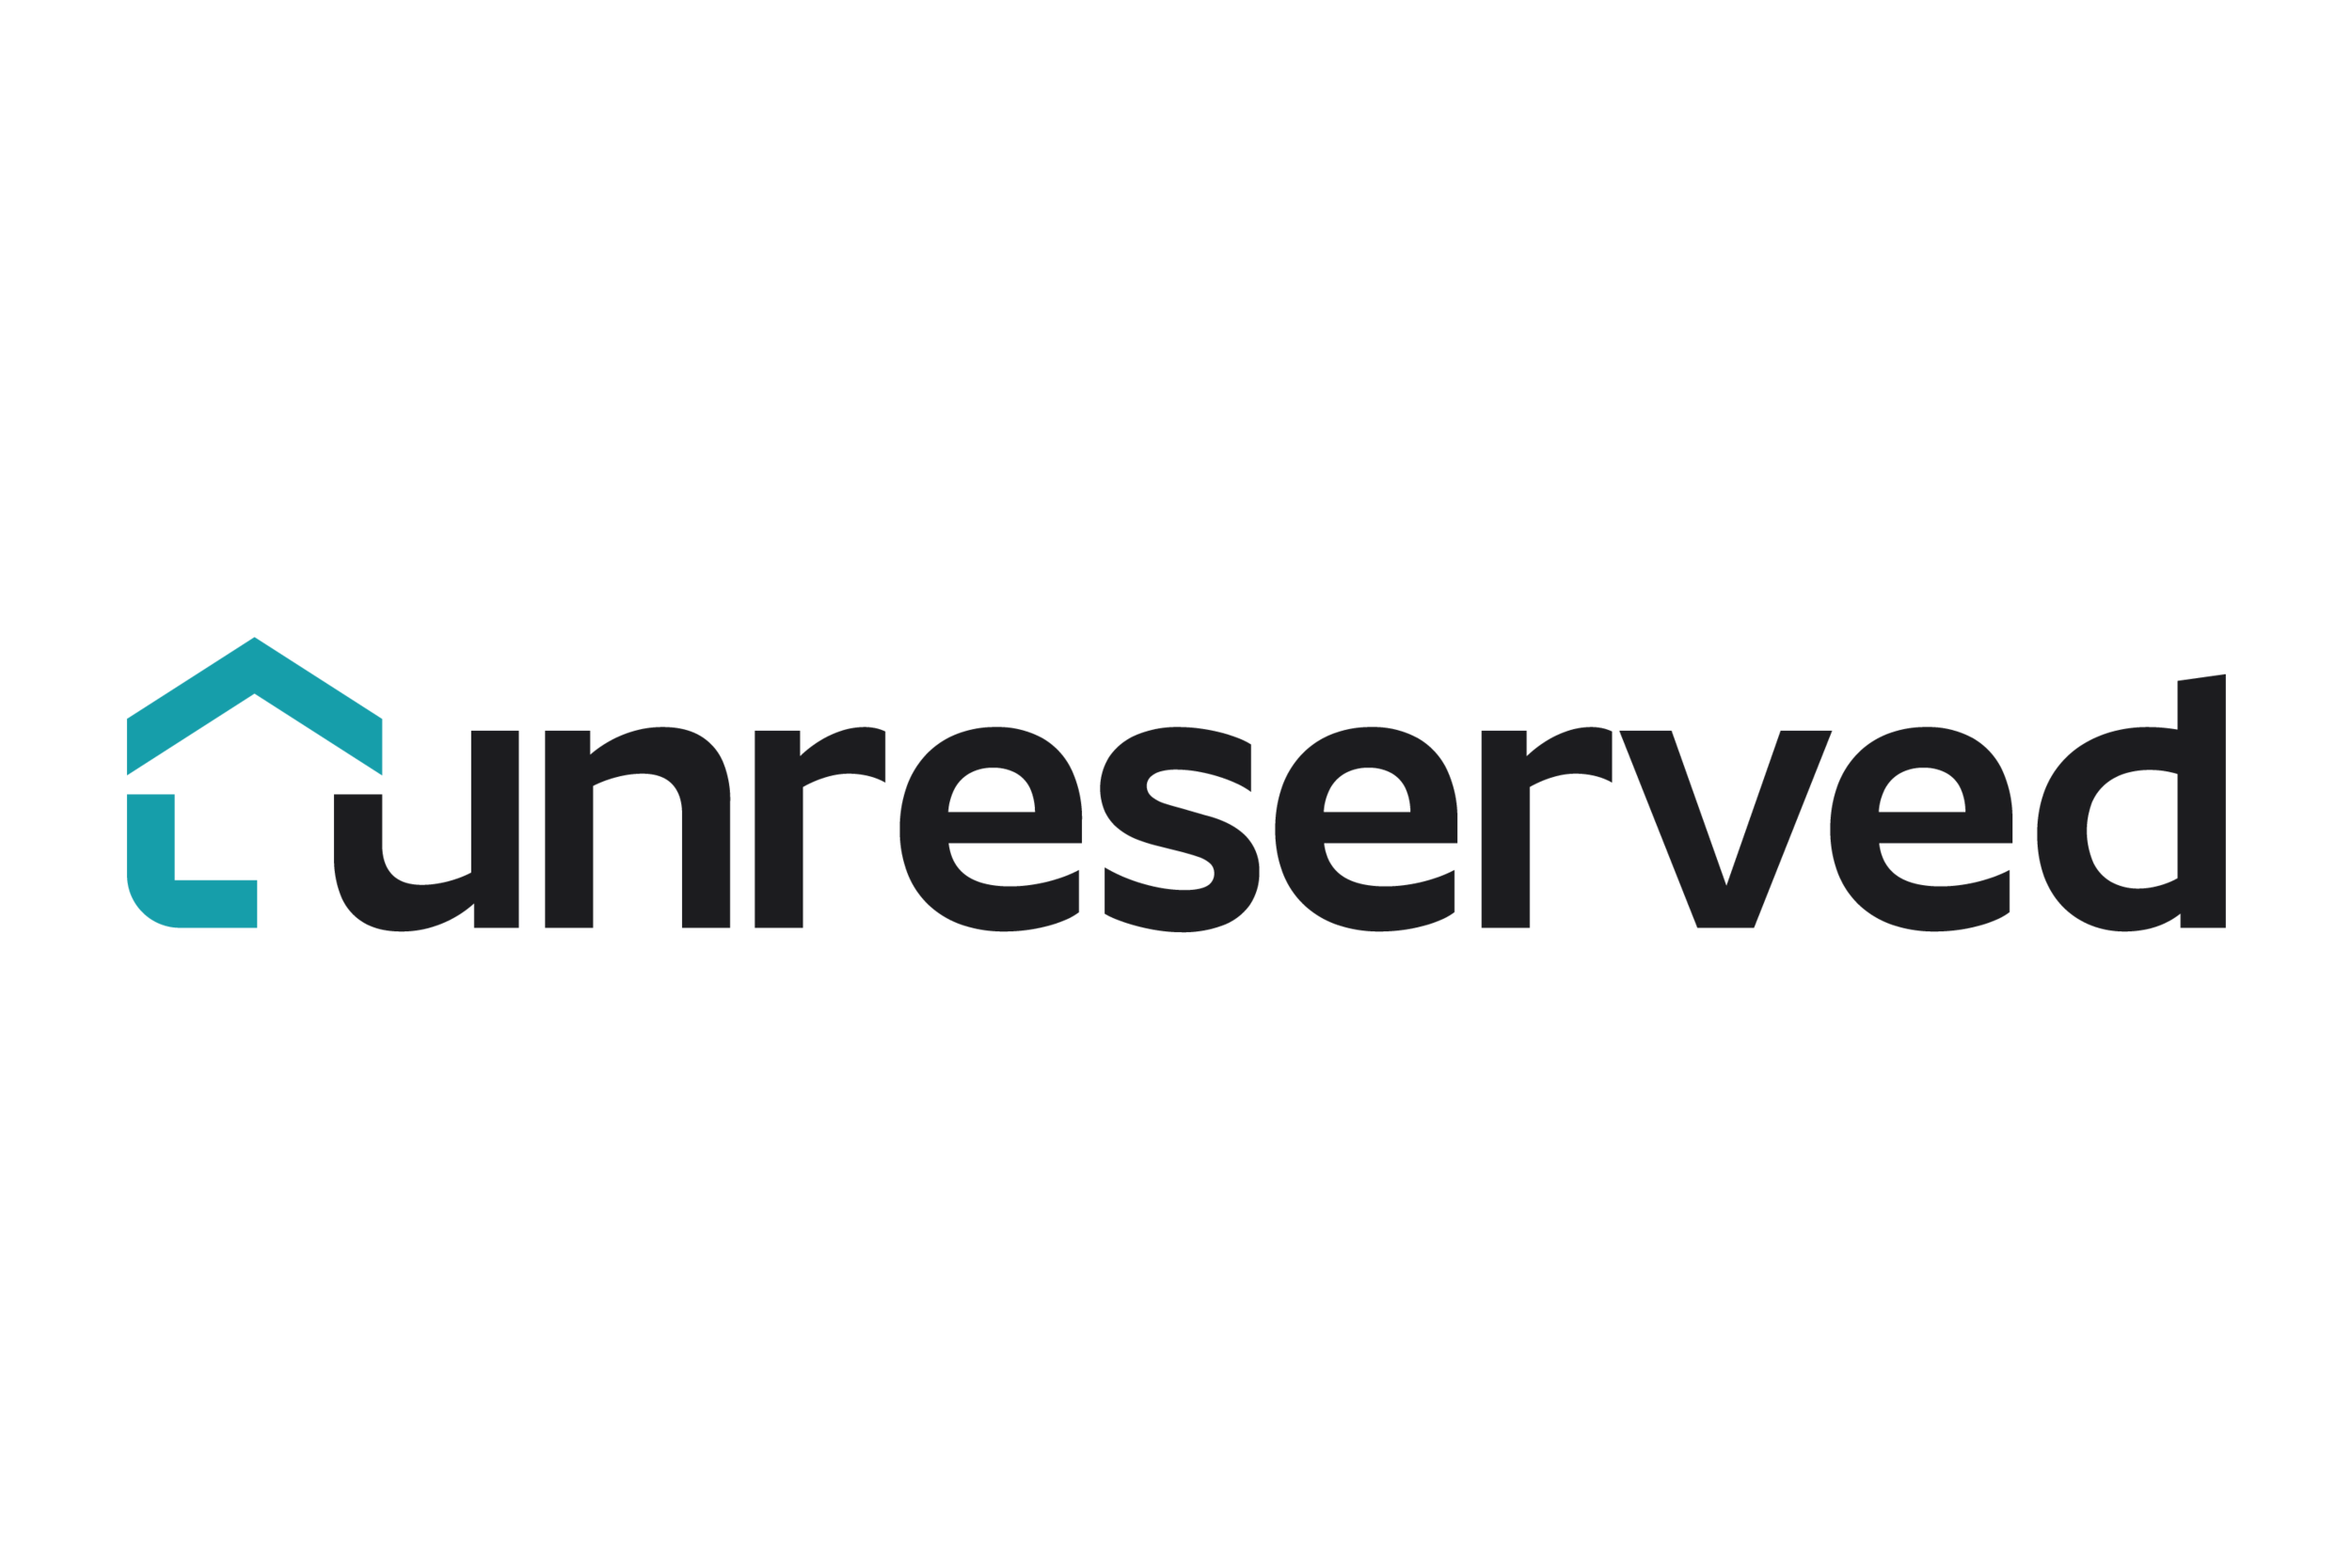 unreserved_logo_black 3x2.png